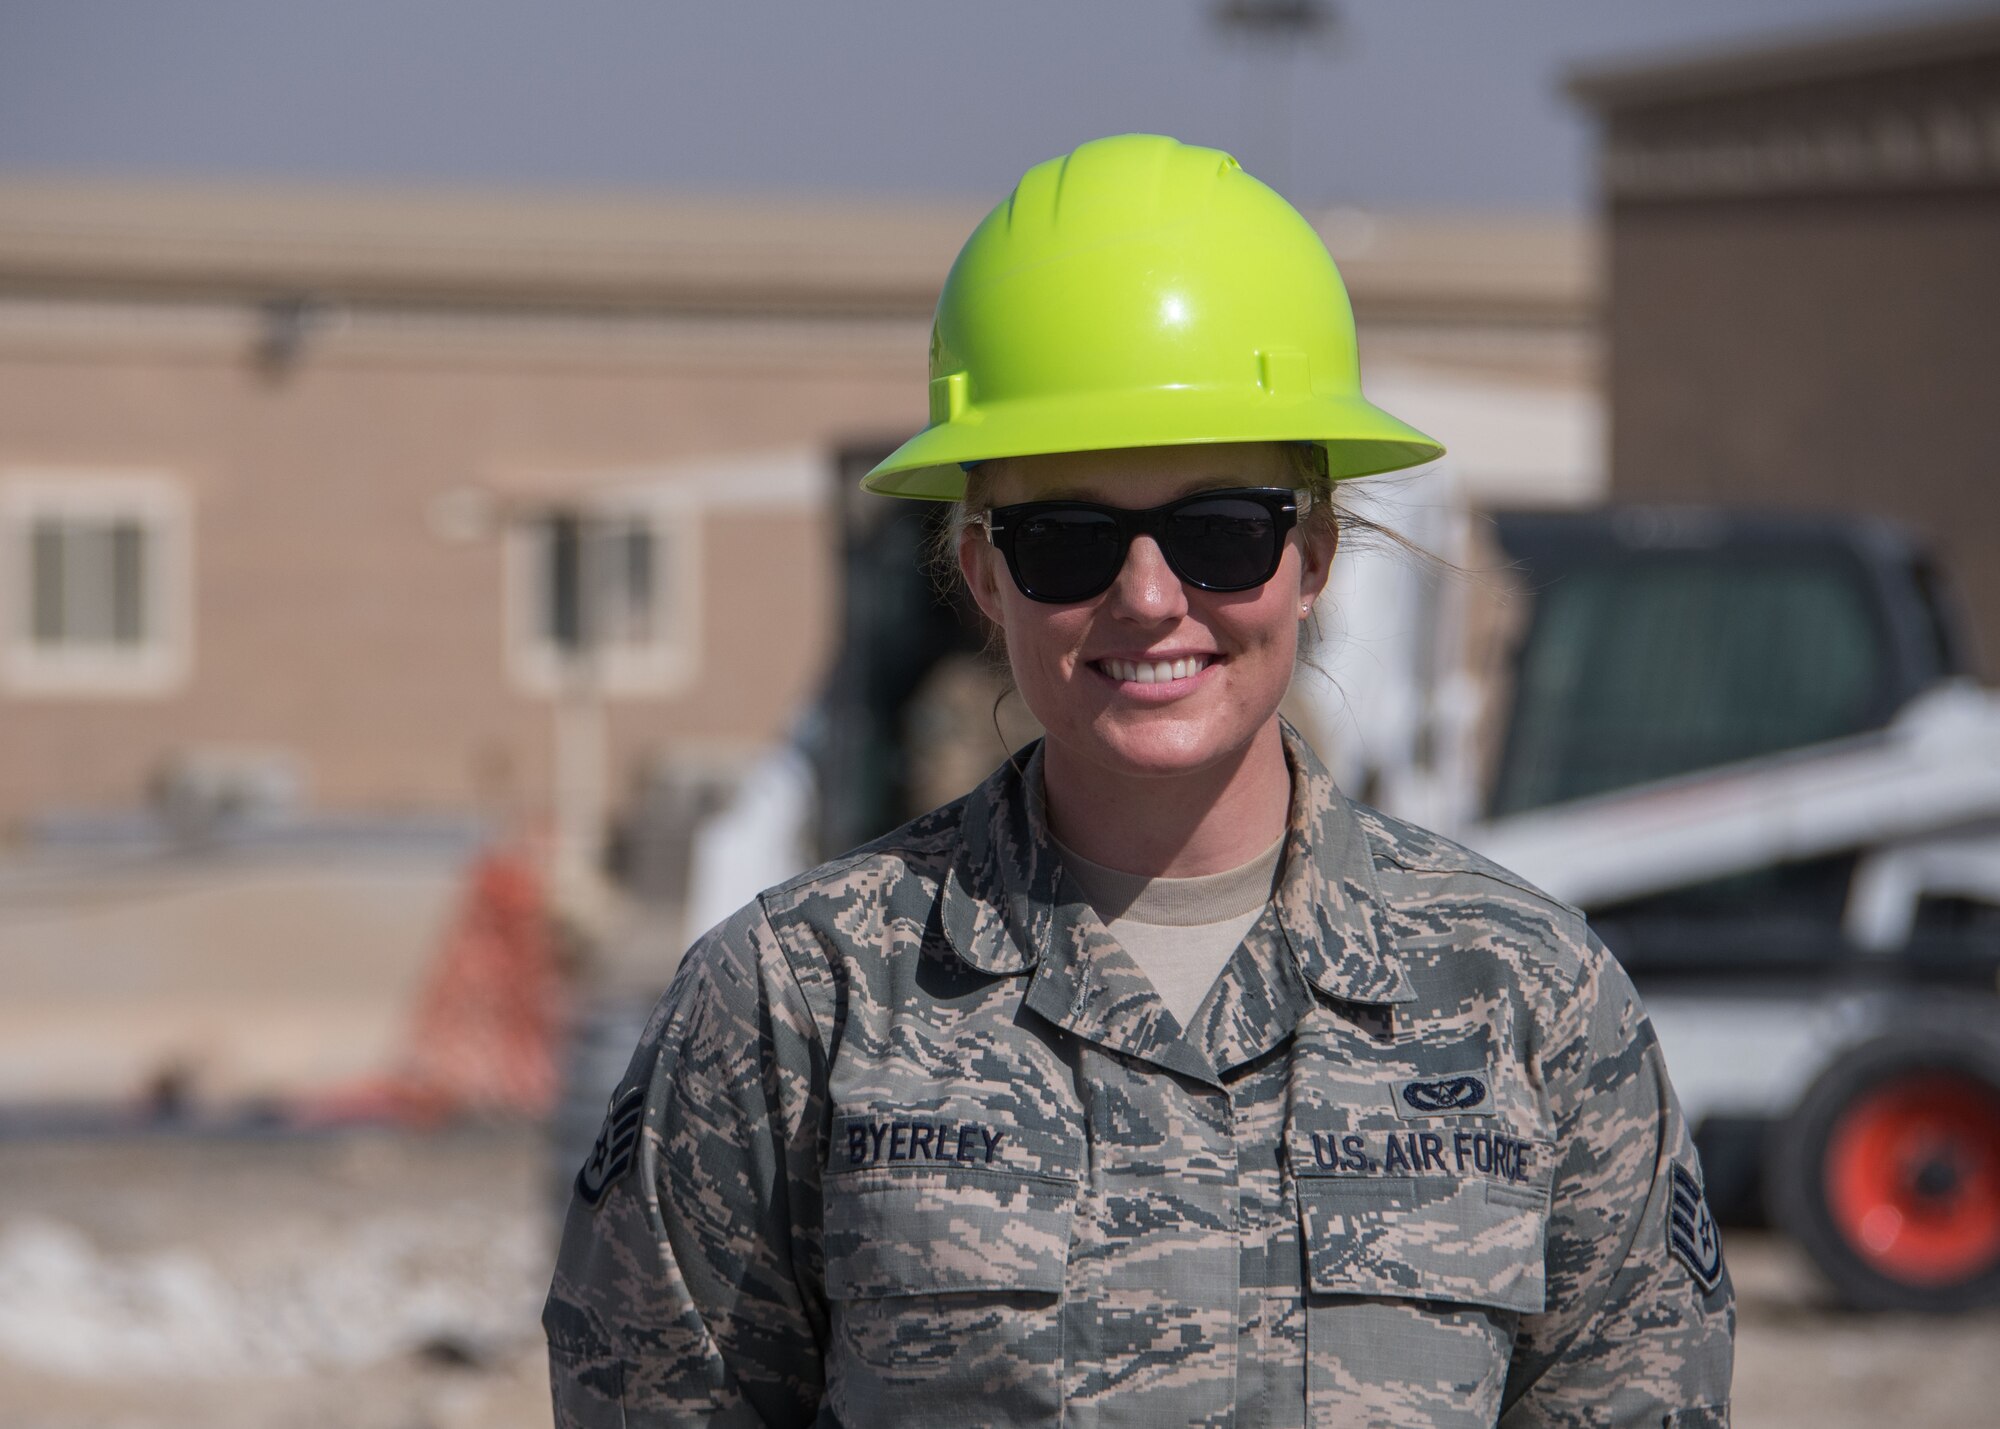 This week's Rock Solid Warrior is Staff Sgt. Brooke Byerley, a 386th Expeditionary Civil Engineer Squadron construction manager and Pass and ID liaison, deployed from Altus Air Force Base, Okla. The Rock Solid Warrior program is a way to recognize and spotlight the Airmen of the 386th Air Expeditionary Wing for their positive impact and commitment to the mission. (U.S. Air Force photo/Senior Airman Andrew Park)